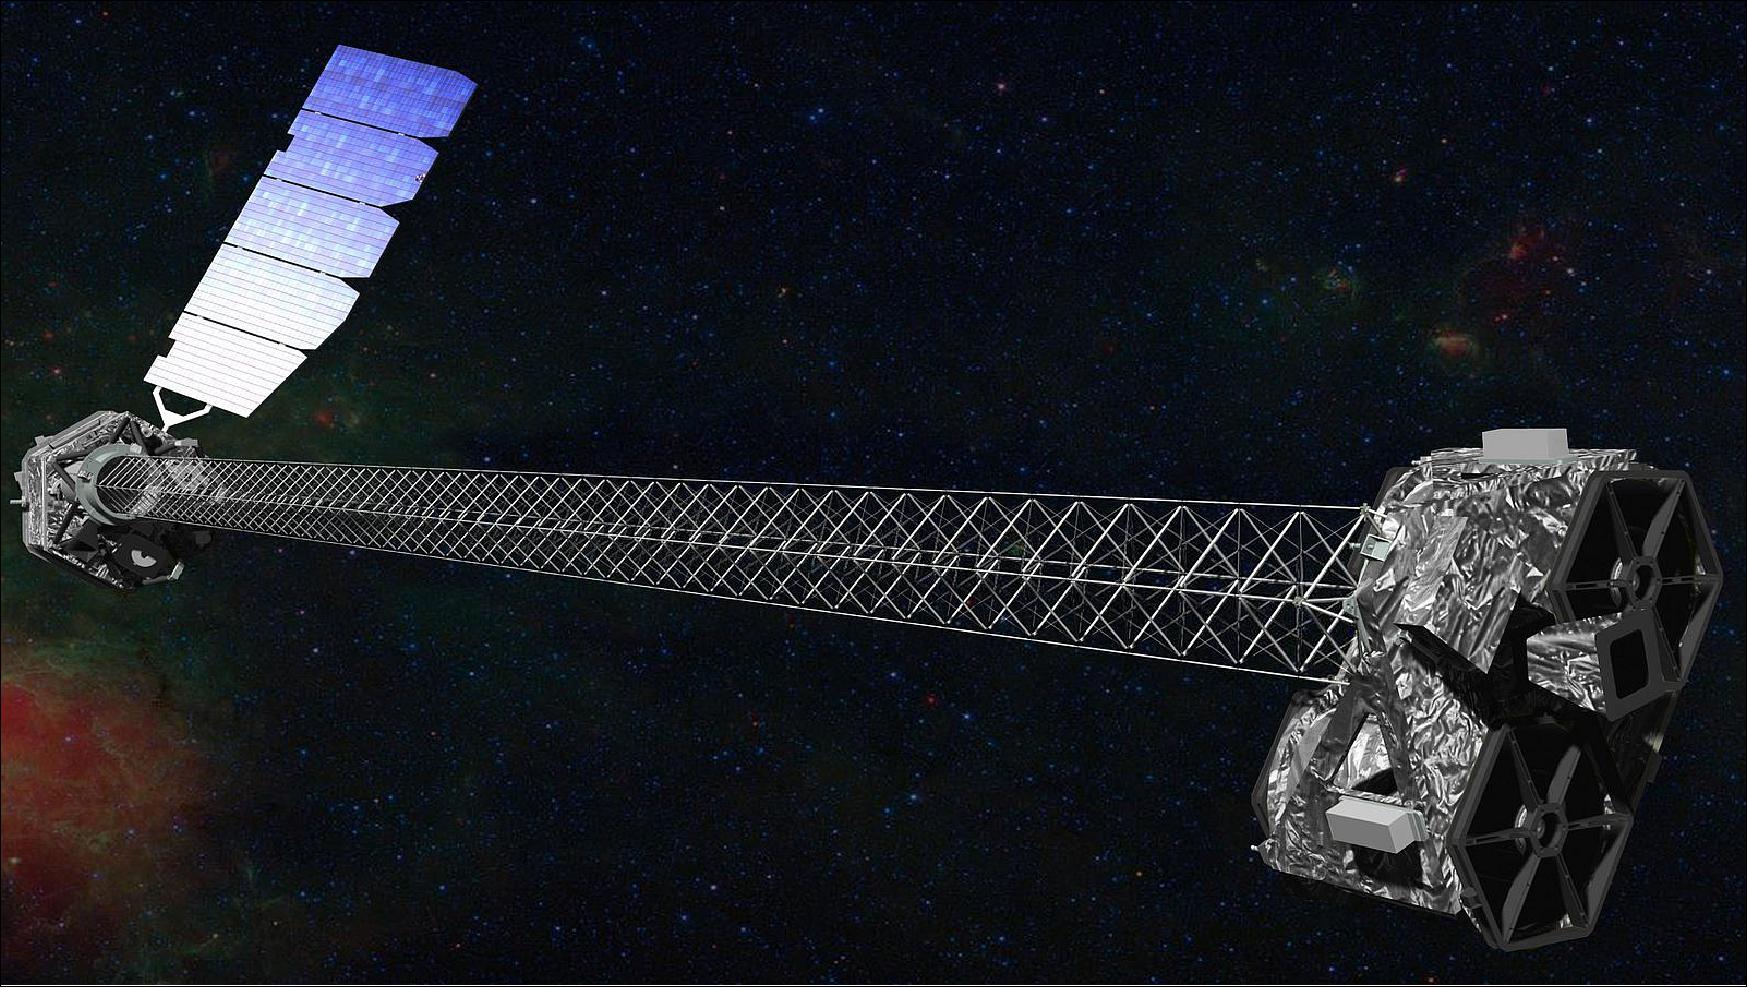 Figure 14: Artist's concept of NuSTAR on orbit. NuSTAR has a 10-m (30') mast that deploys after launch to separate the optics modules (right) from the detectors in the focal plane (left). The spacecraft, which controls NuSTAR's pointings, and the solar panels are with the focal plane. NuSTAR has two identical optics modules in order to increase sensitivity. The background is an image of the Galactic center obtained with the Chandra X-ray Observatory. - NuSTAR's mission operations center is at UC Berkeley. The outreach program is based at Sonoma State University, Rohnert Park, Calif. NASA's Explorer Program is managed by Goddard. JPL is managed by Caltech for NASA (image credit: NASA/JPL-Caltech)